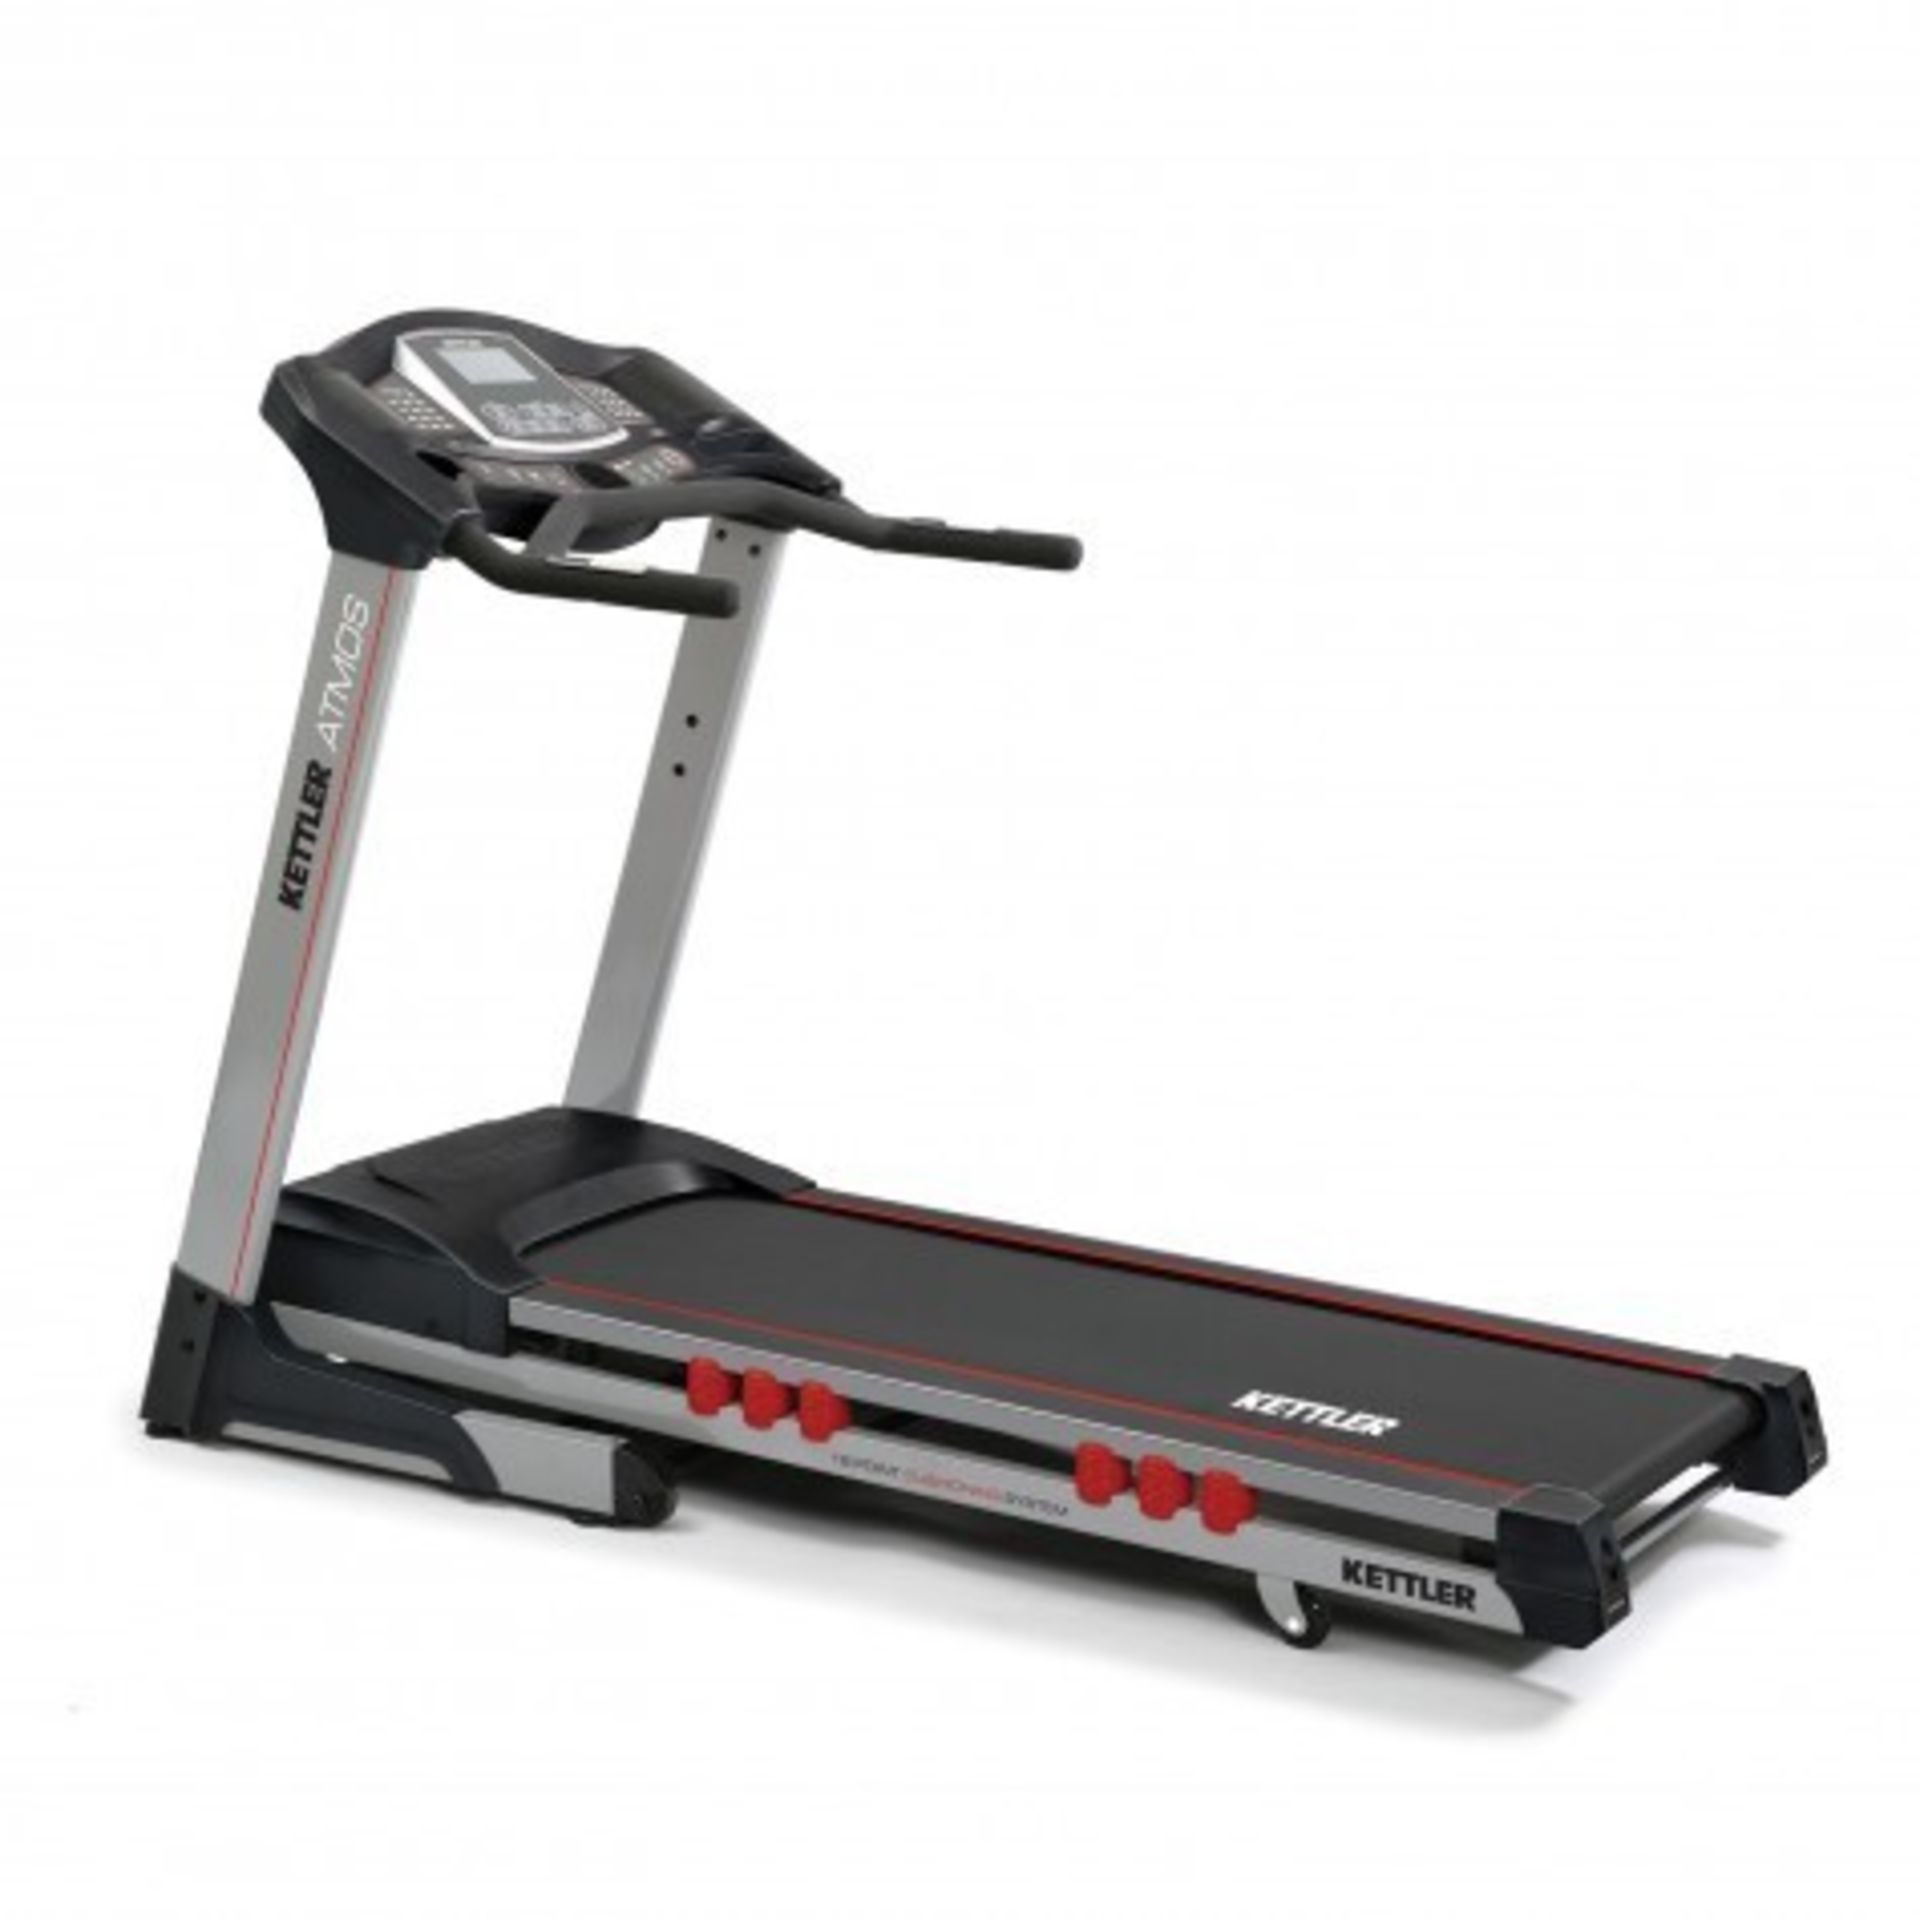 1 ASSEMBLED KETTLER ATMOS FOLDING TREADMILL / RRP £899 (PUBLIC VIEWING AVAILABLE)